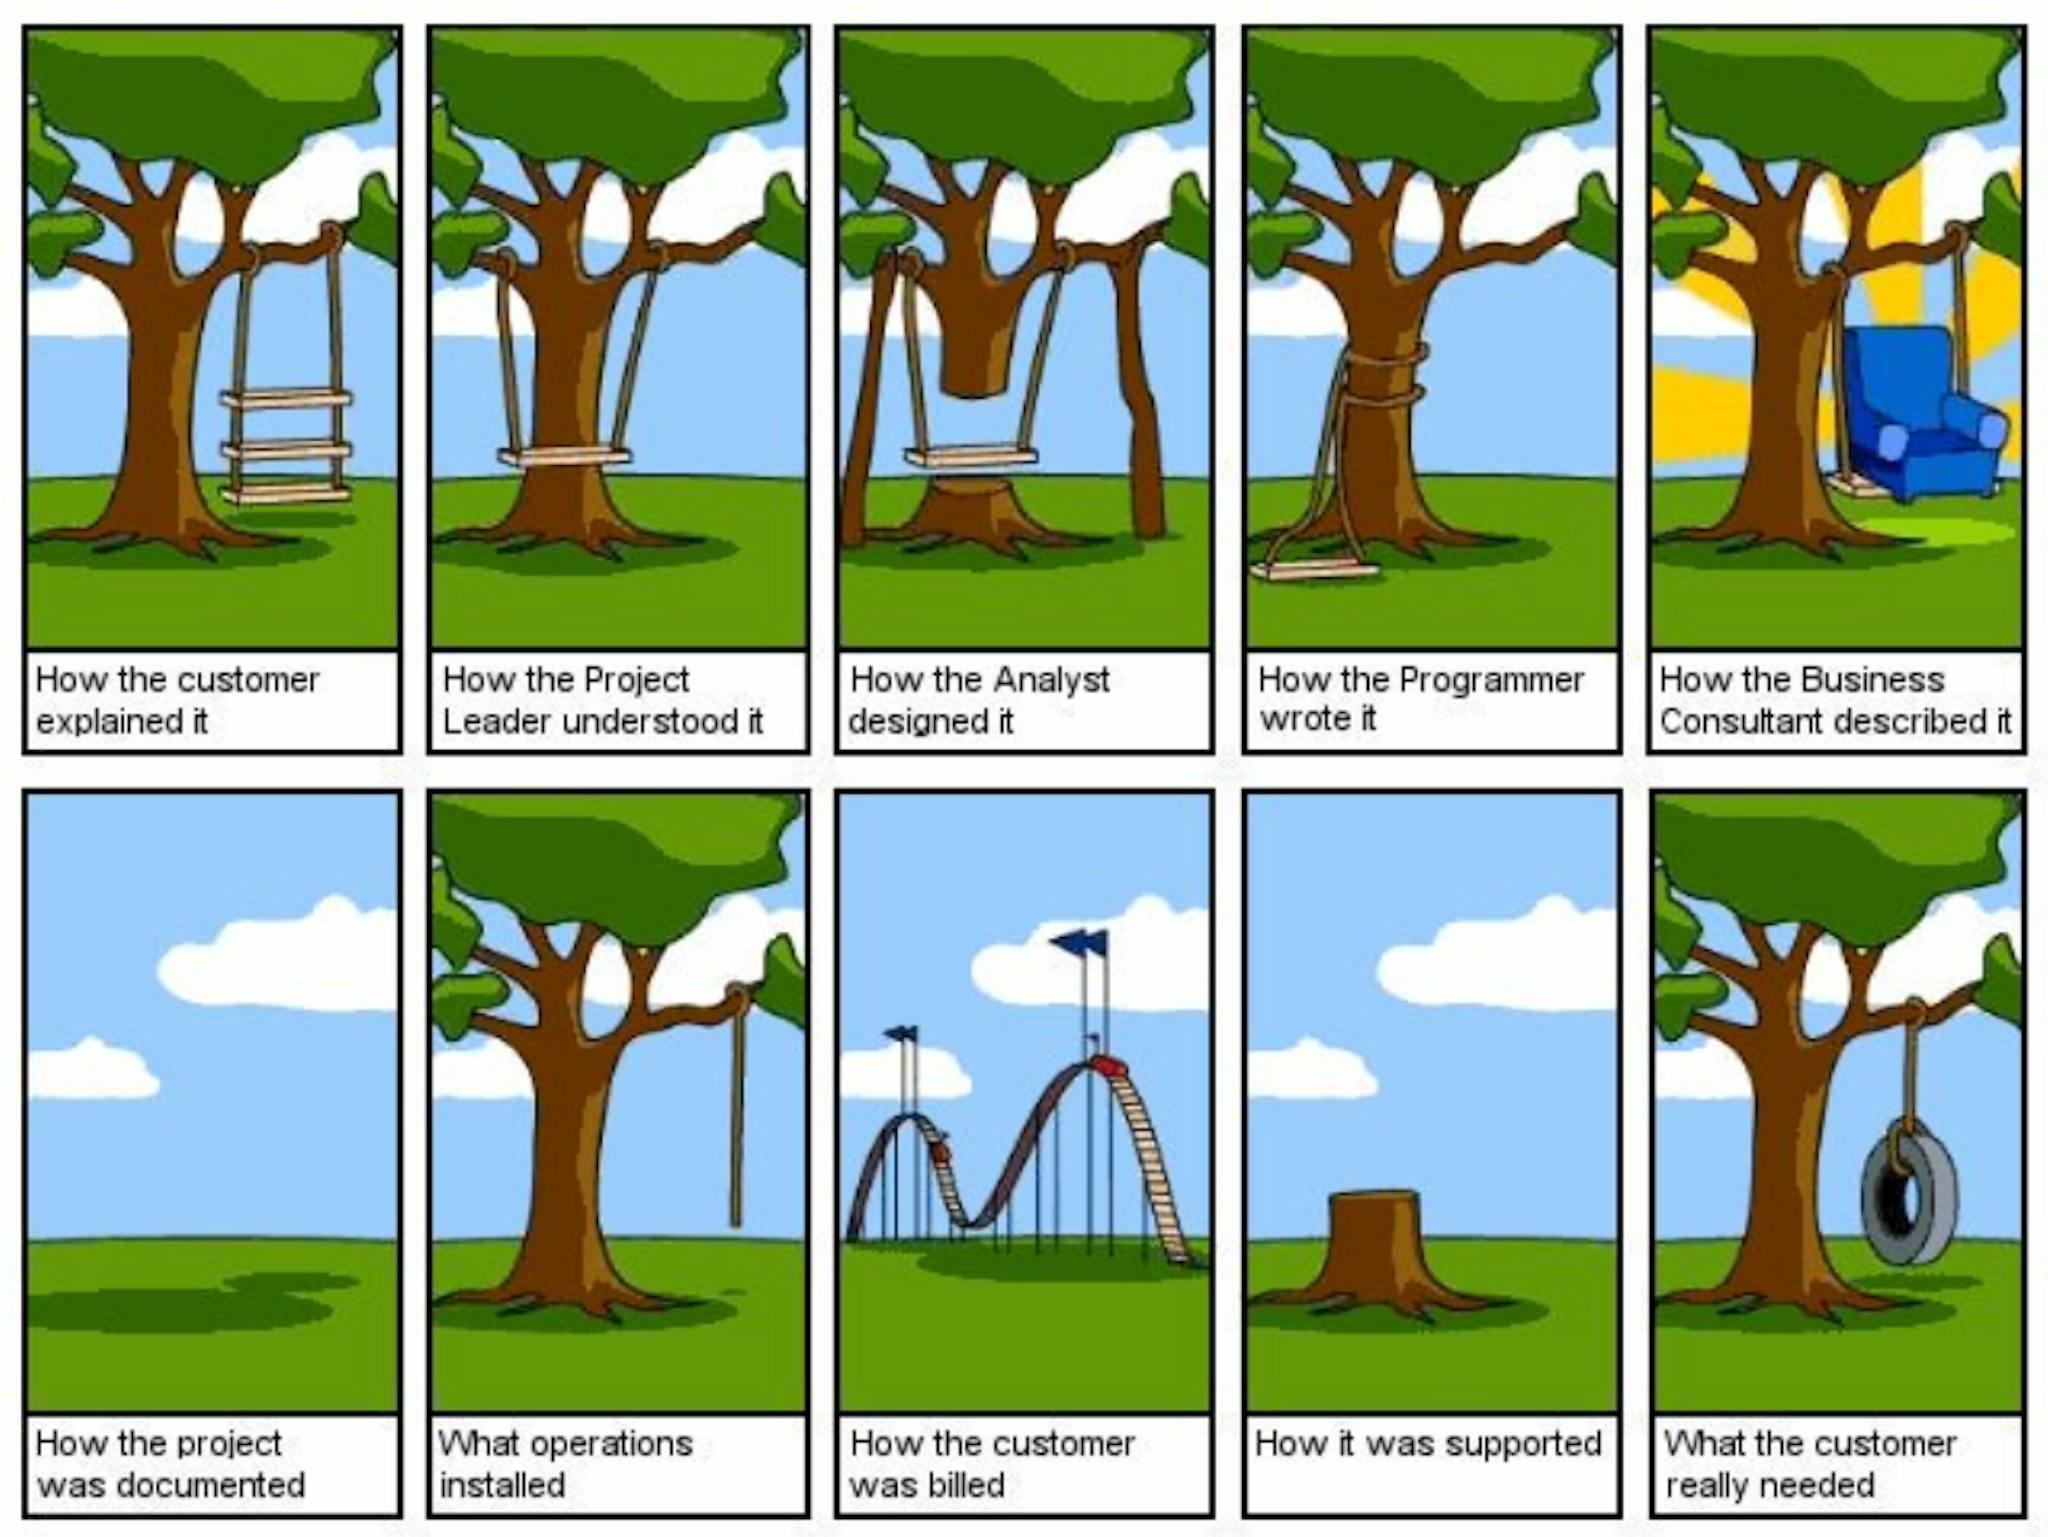 An image showing a cartoon depiction of the software dev lifecycle.